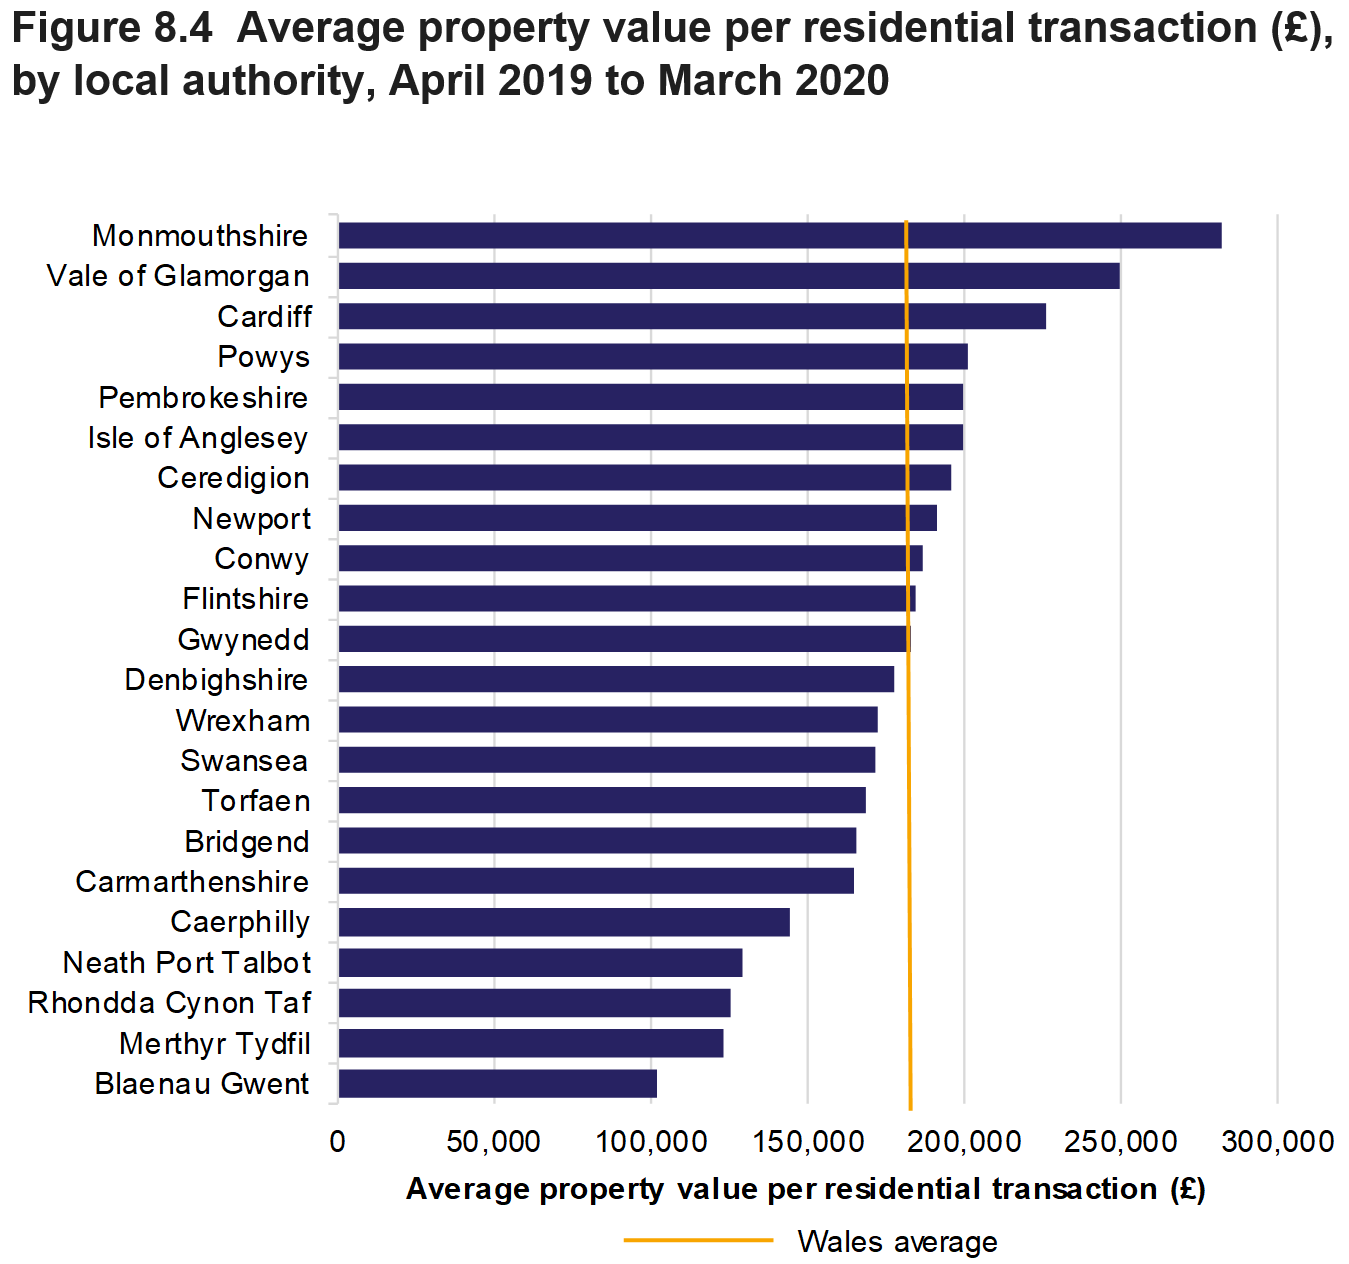 Figure 8.4 shows the average property value per residential transaction, for all local authorities and a Wales average, April 2019 to March 2020.